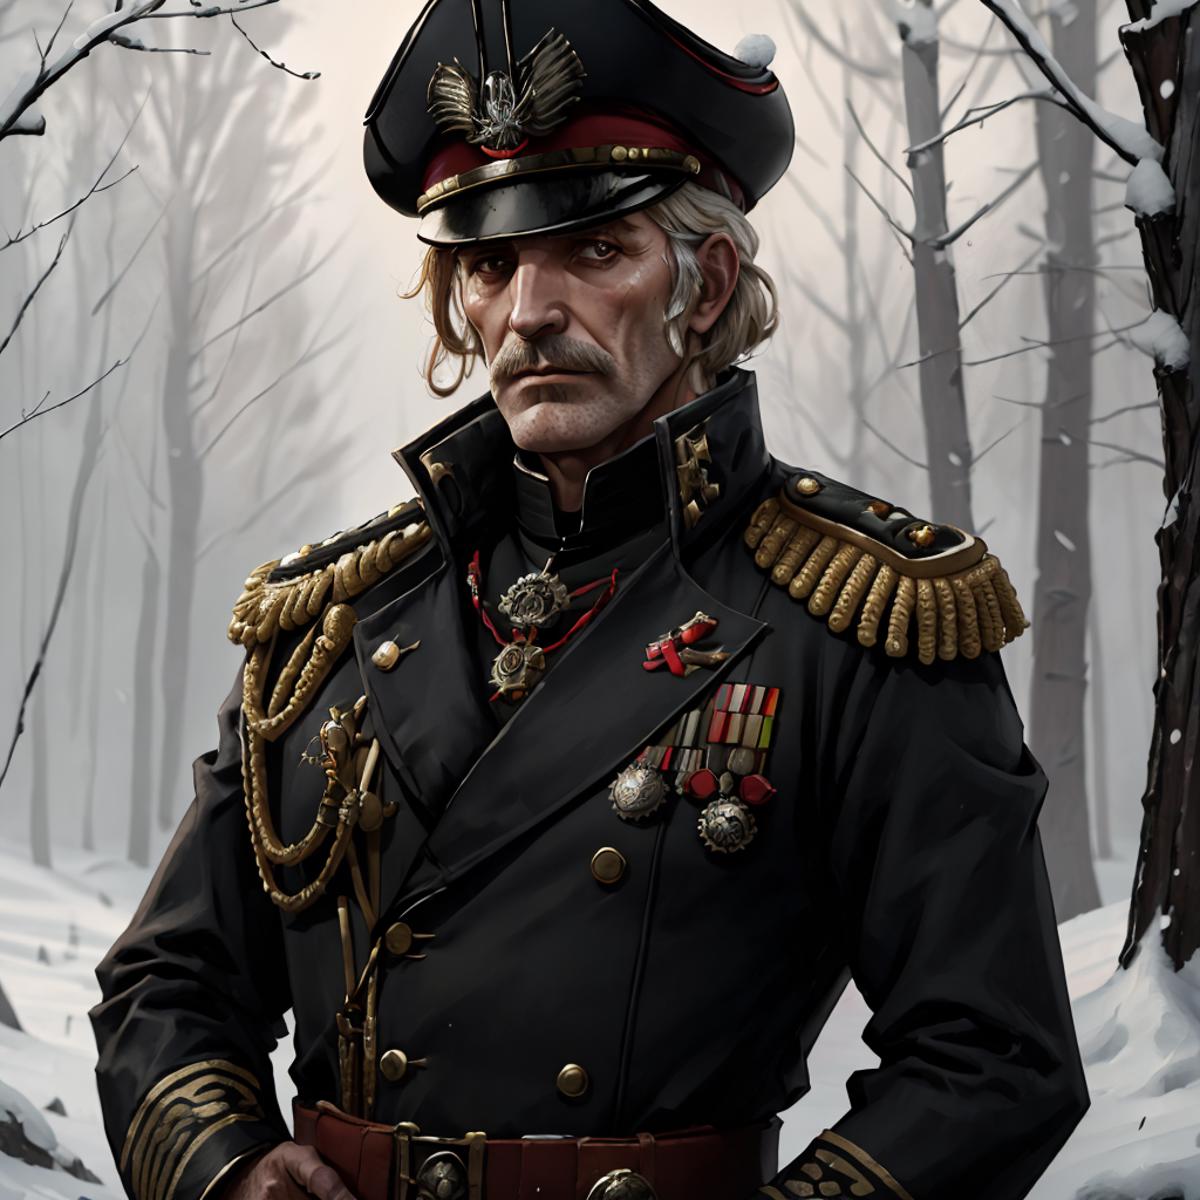 A man in a military uniform with a black hat, standing in a snowy forest.